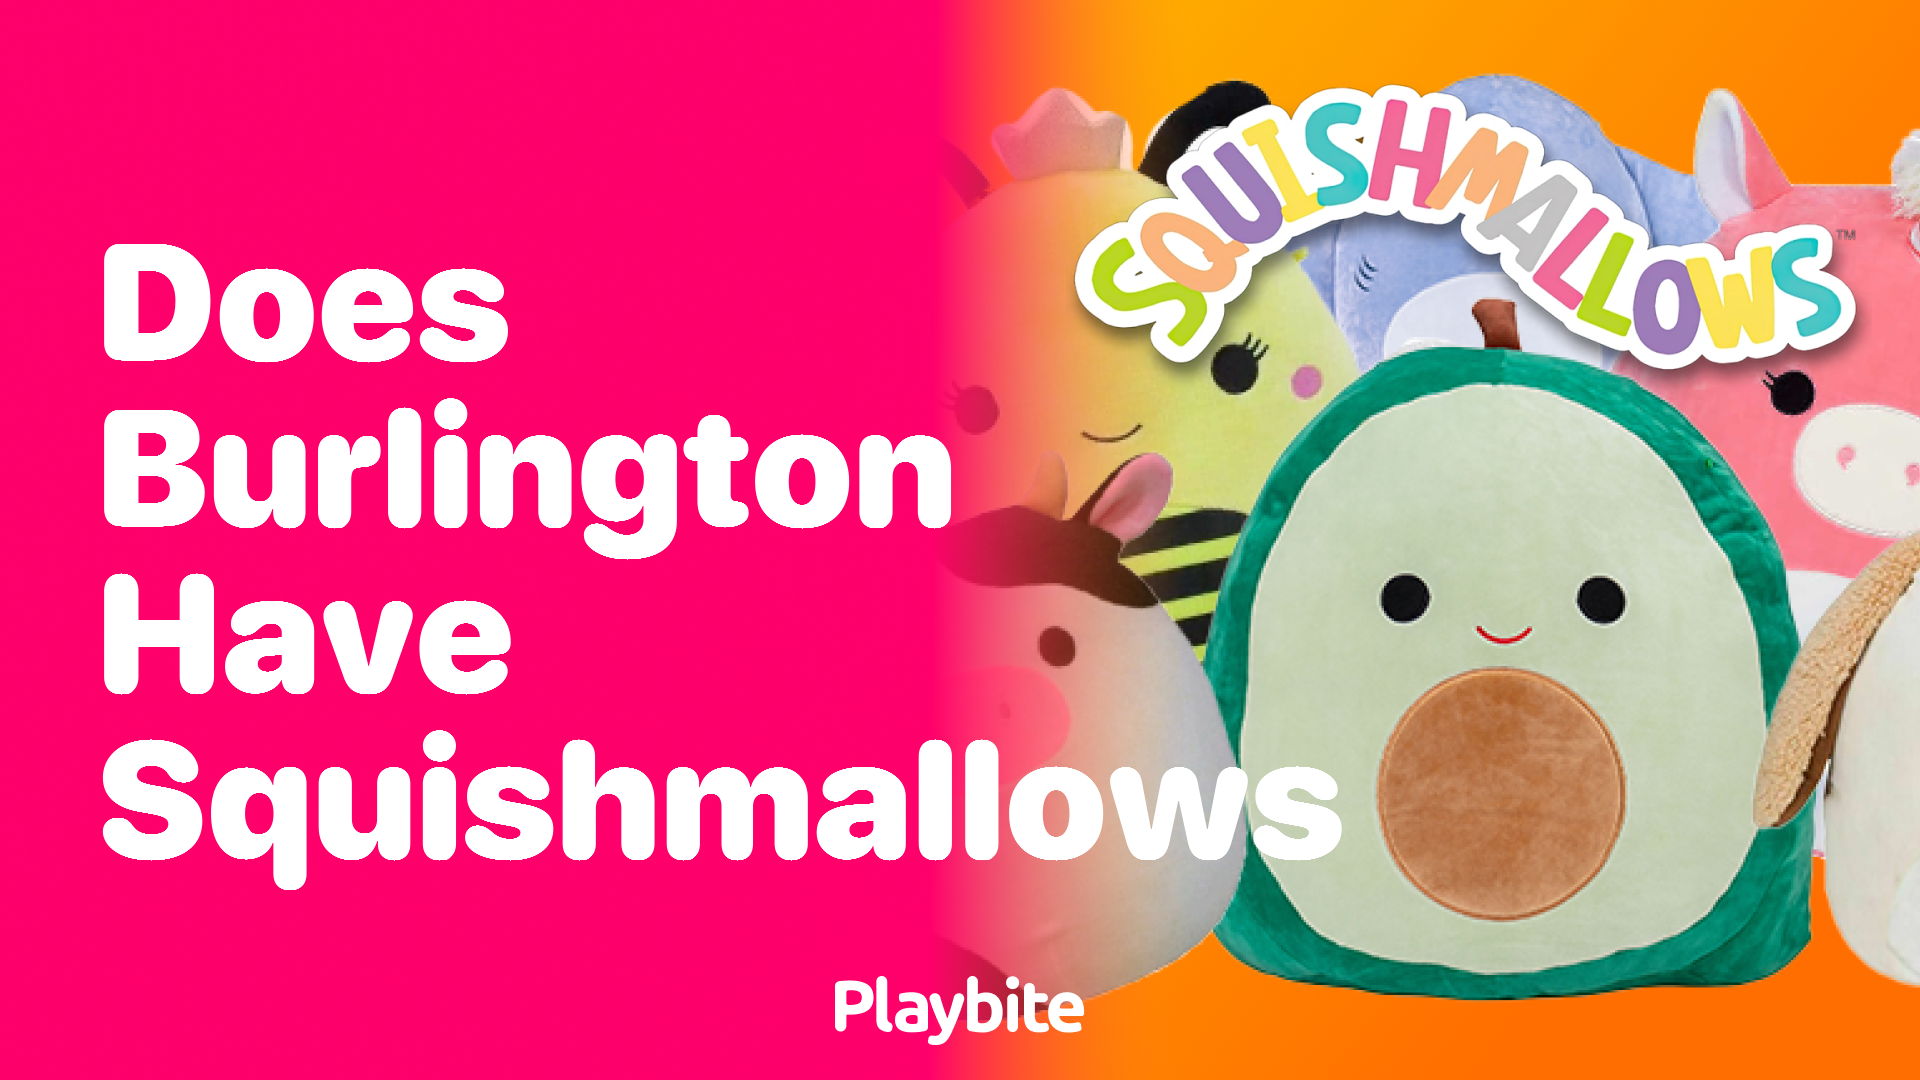 Does Burlington Have Squishmallows? Unveiling the Truth